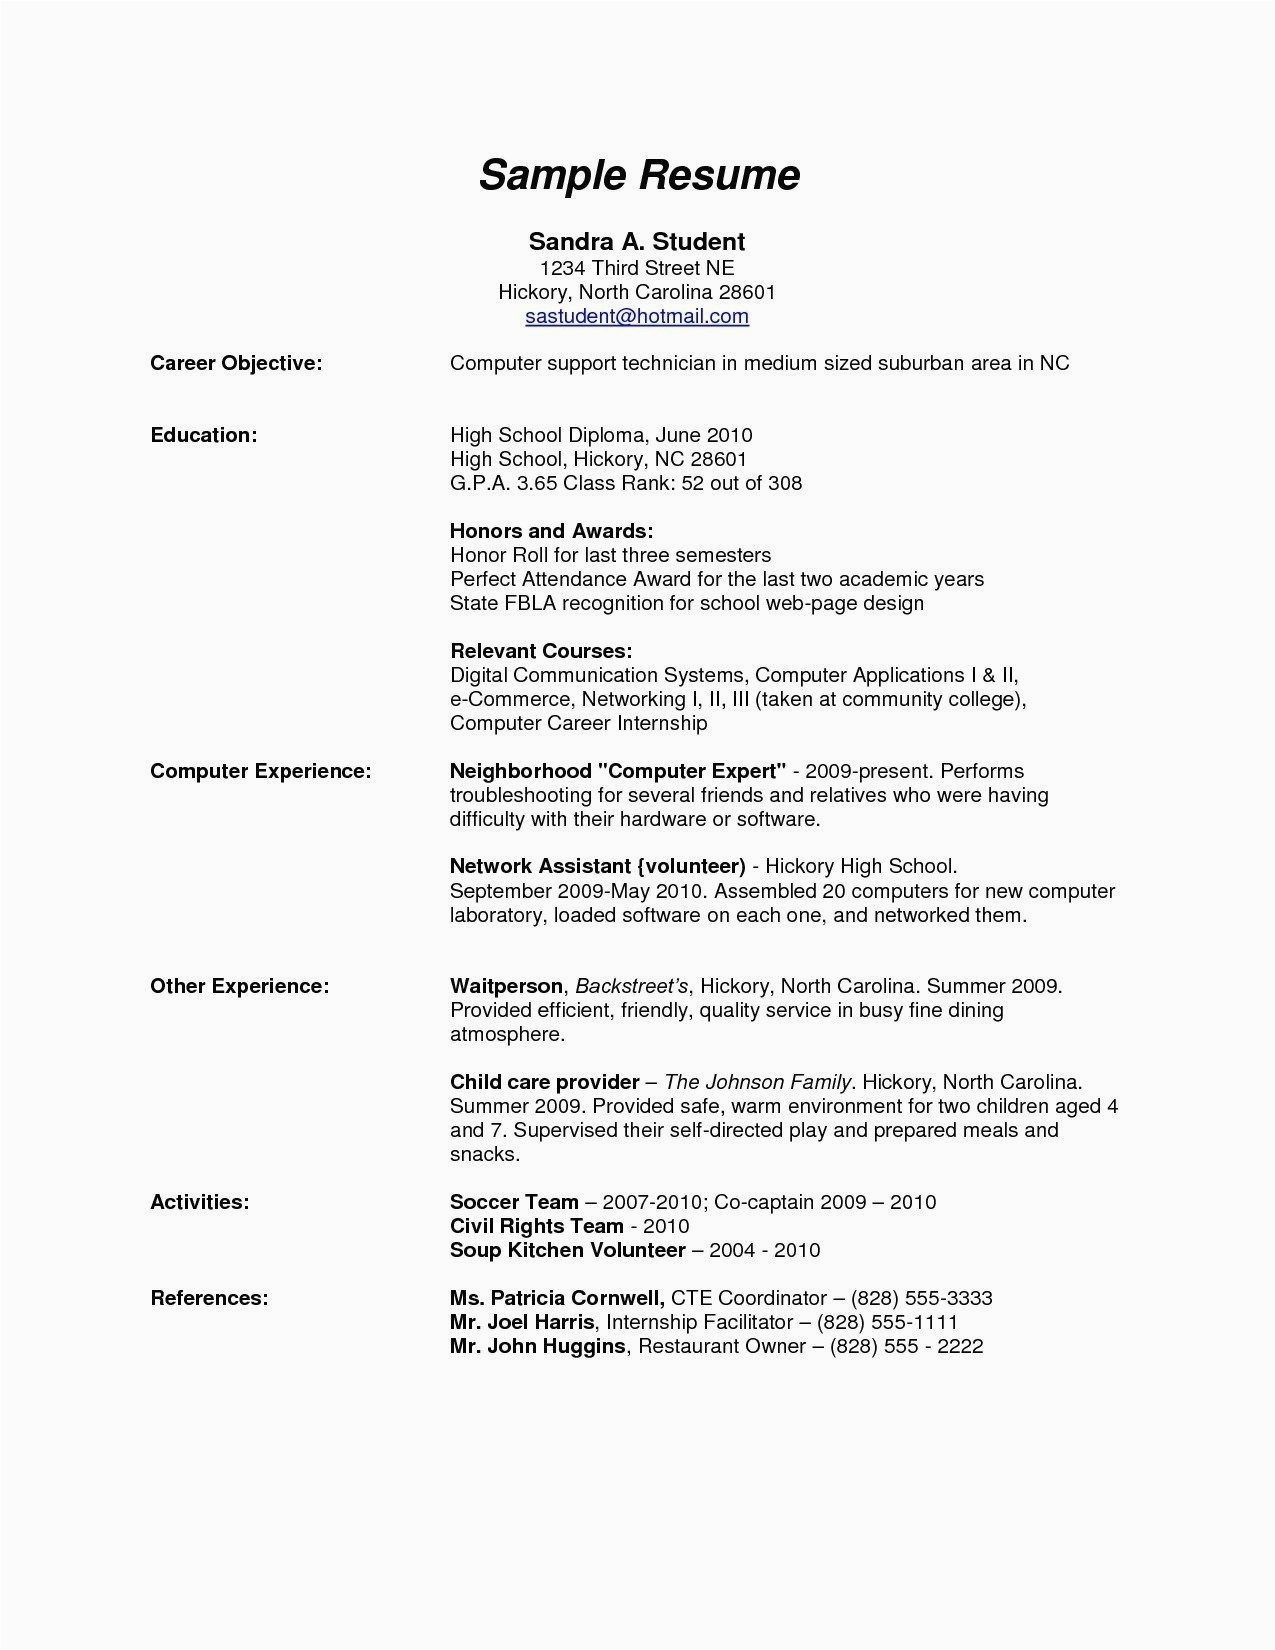 Resume Objective Sample for High School Graduate High School Graduate Resume Template Download – Resume